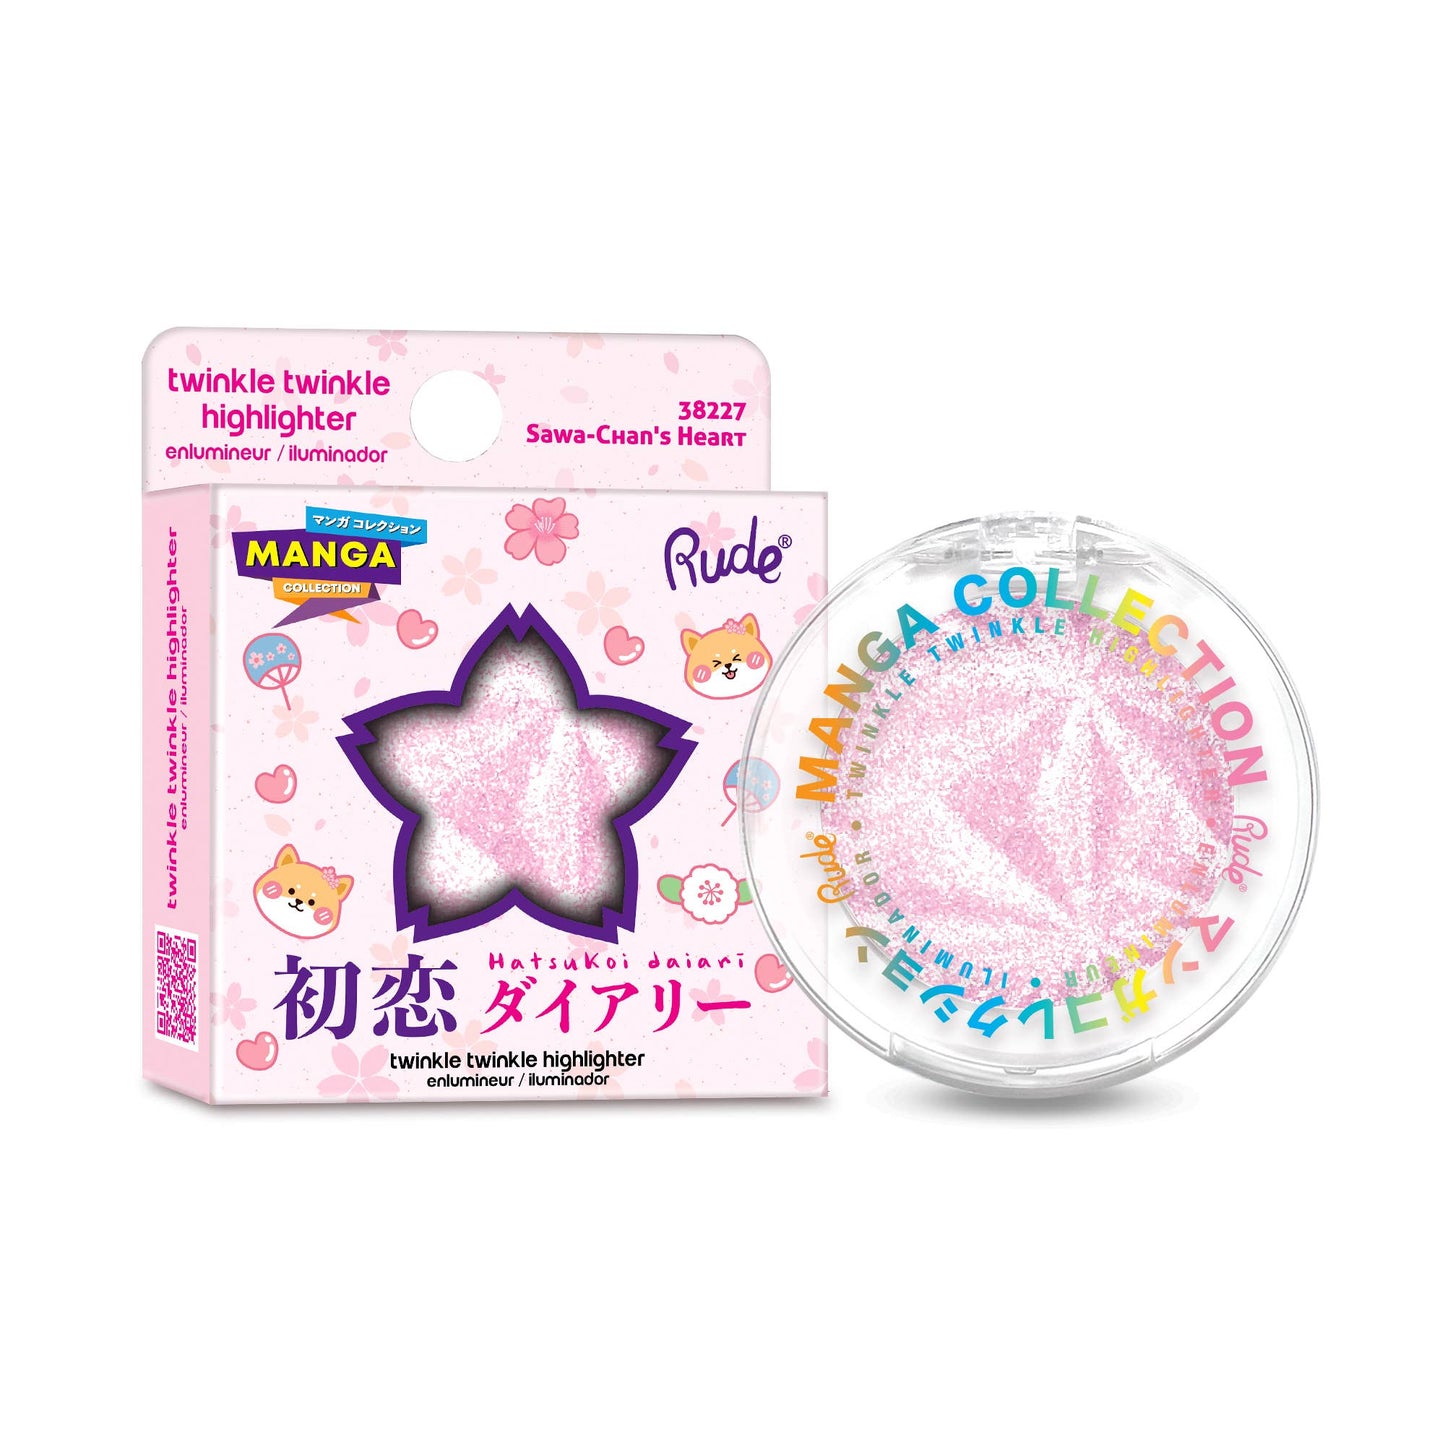 Manga Collection Twinkle Twinkle Highlighter: Sawa-Chan's Heart